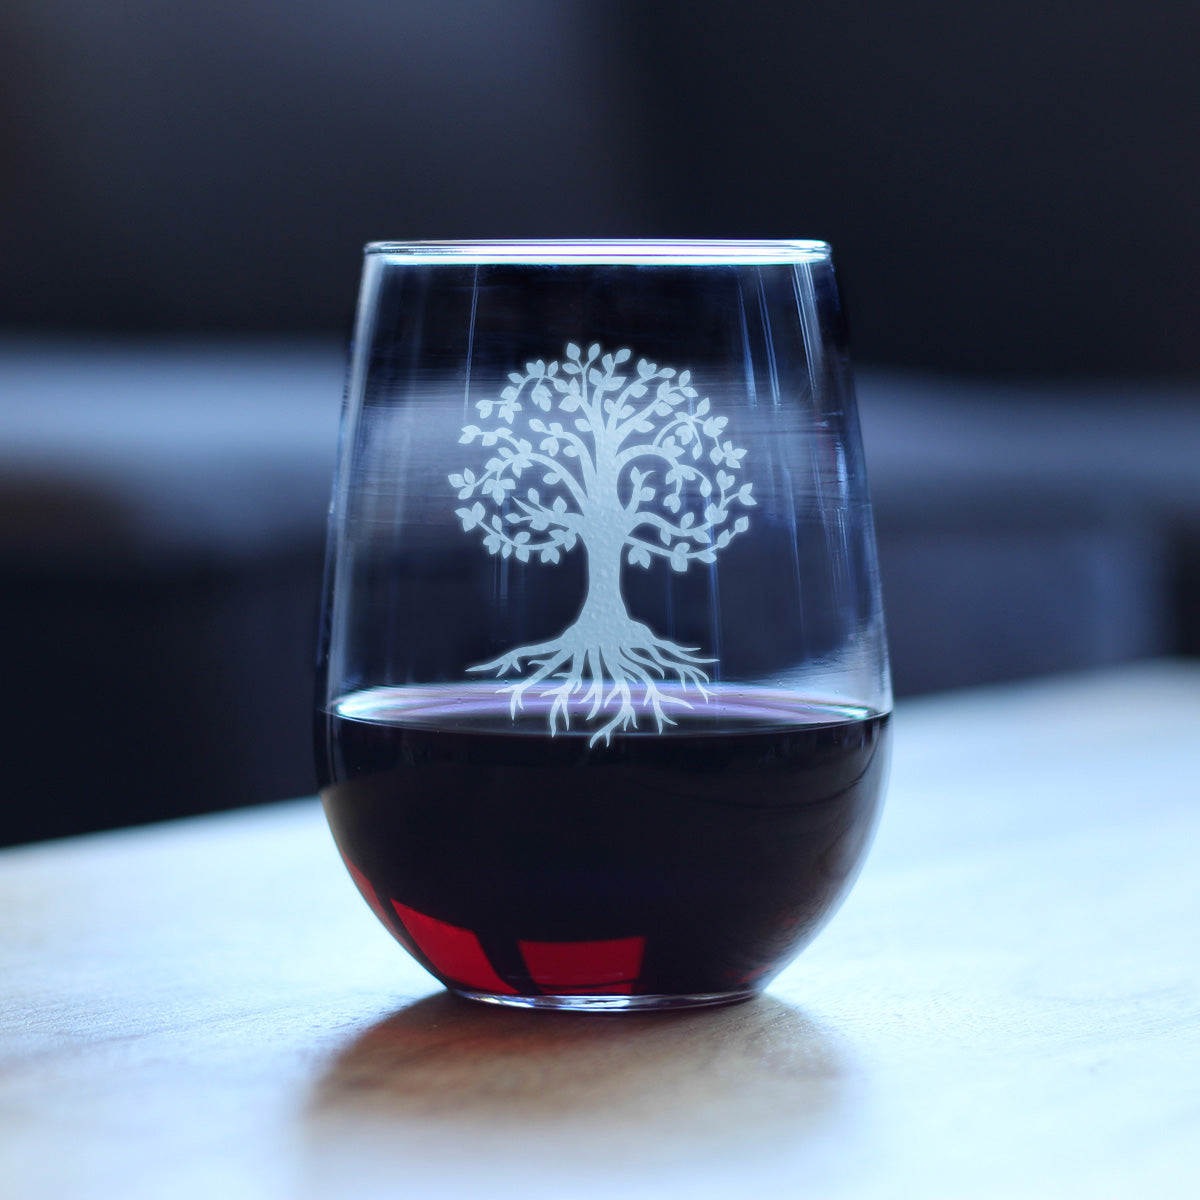 Tree Of Life - Stemless Wine Glass - Cute Family Themed Gifts and Decor - Large 17 Oz Glass